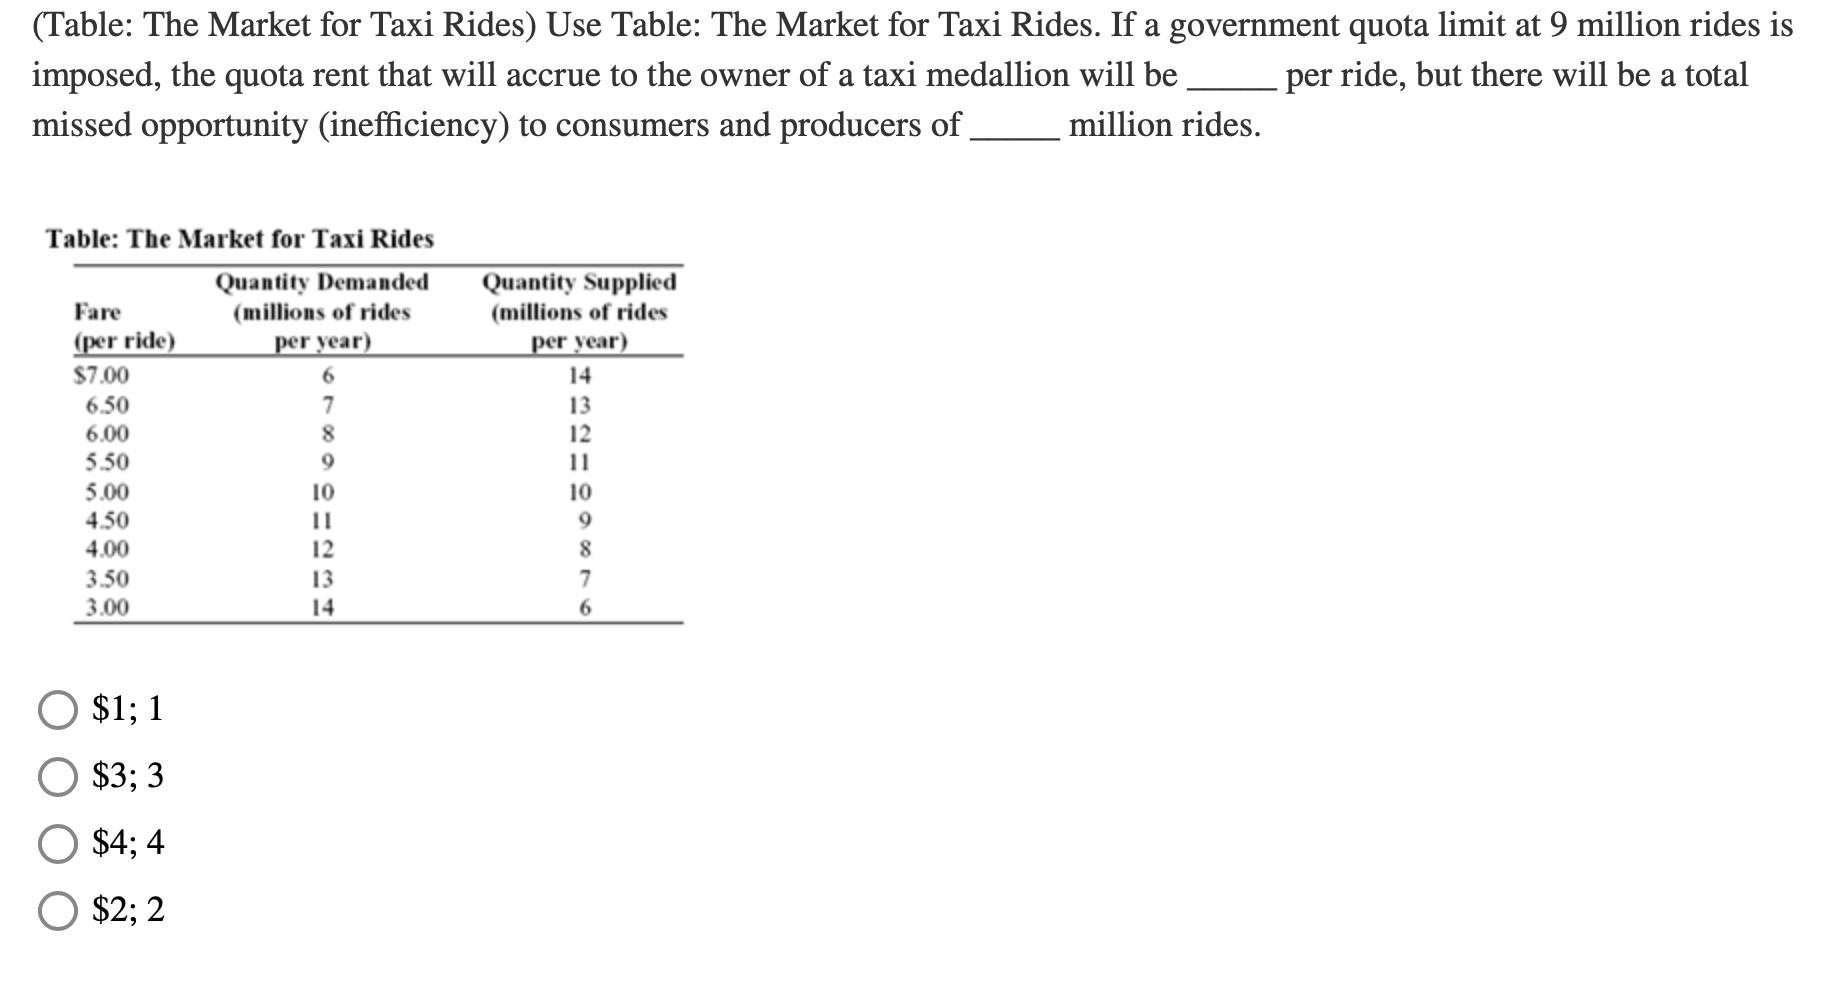 (Table: The Market for Taxi Rides) Use Table: The Market for Taxi Rides. If a government quota limit at 9 million rides is
imposed, the quota rent that will accrue to the owner of a taxi medallion will be
per ride, but there will be a total
missed opportunity (inefficiency) to consumers and producers of
million rides.
Table: The Market for Taxi Rides
Quantity Demanded
(millions of rides
per year)
Quantity Supplied
(millions of rides
Fare
(per ride)
per year)
$7.00
6.
14
6.50
7
13
6.00
12
5.50
9
11
5.00
10
10
4.50
4.00
12
3.50
13
3.00
14
6
$1; 1
$3; 3
$4; 4
$2; 2
